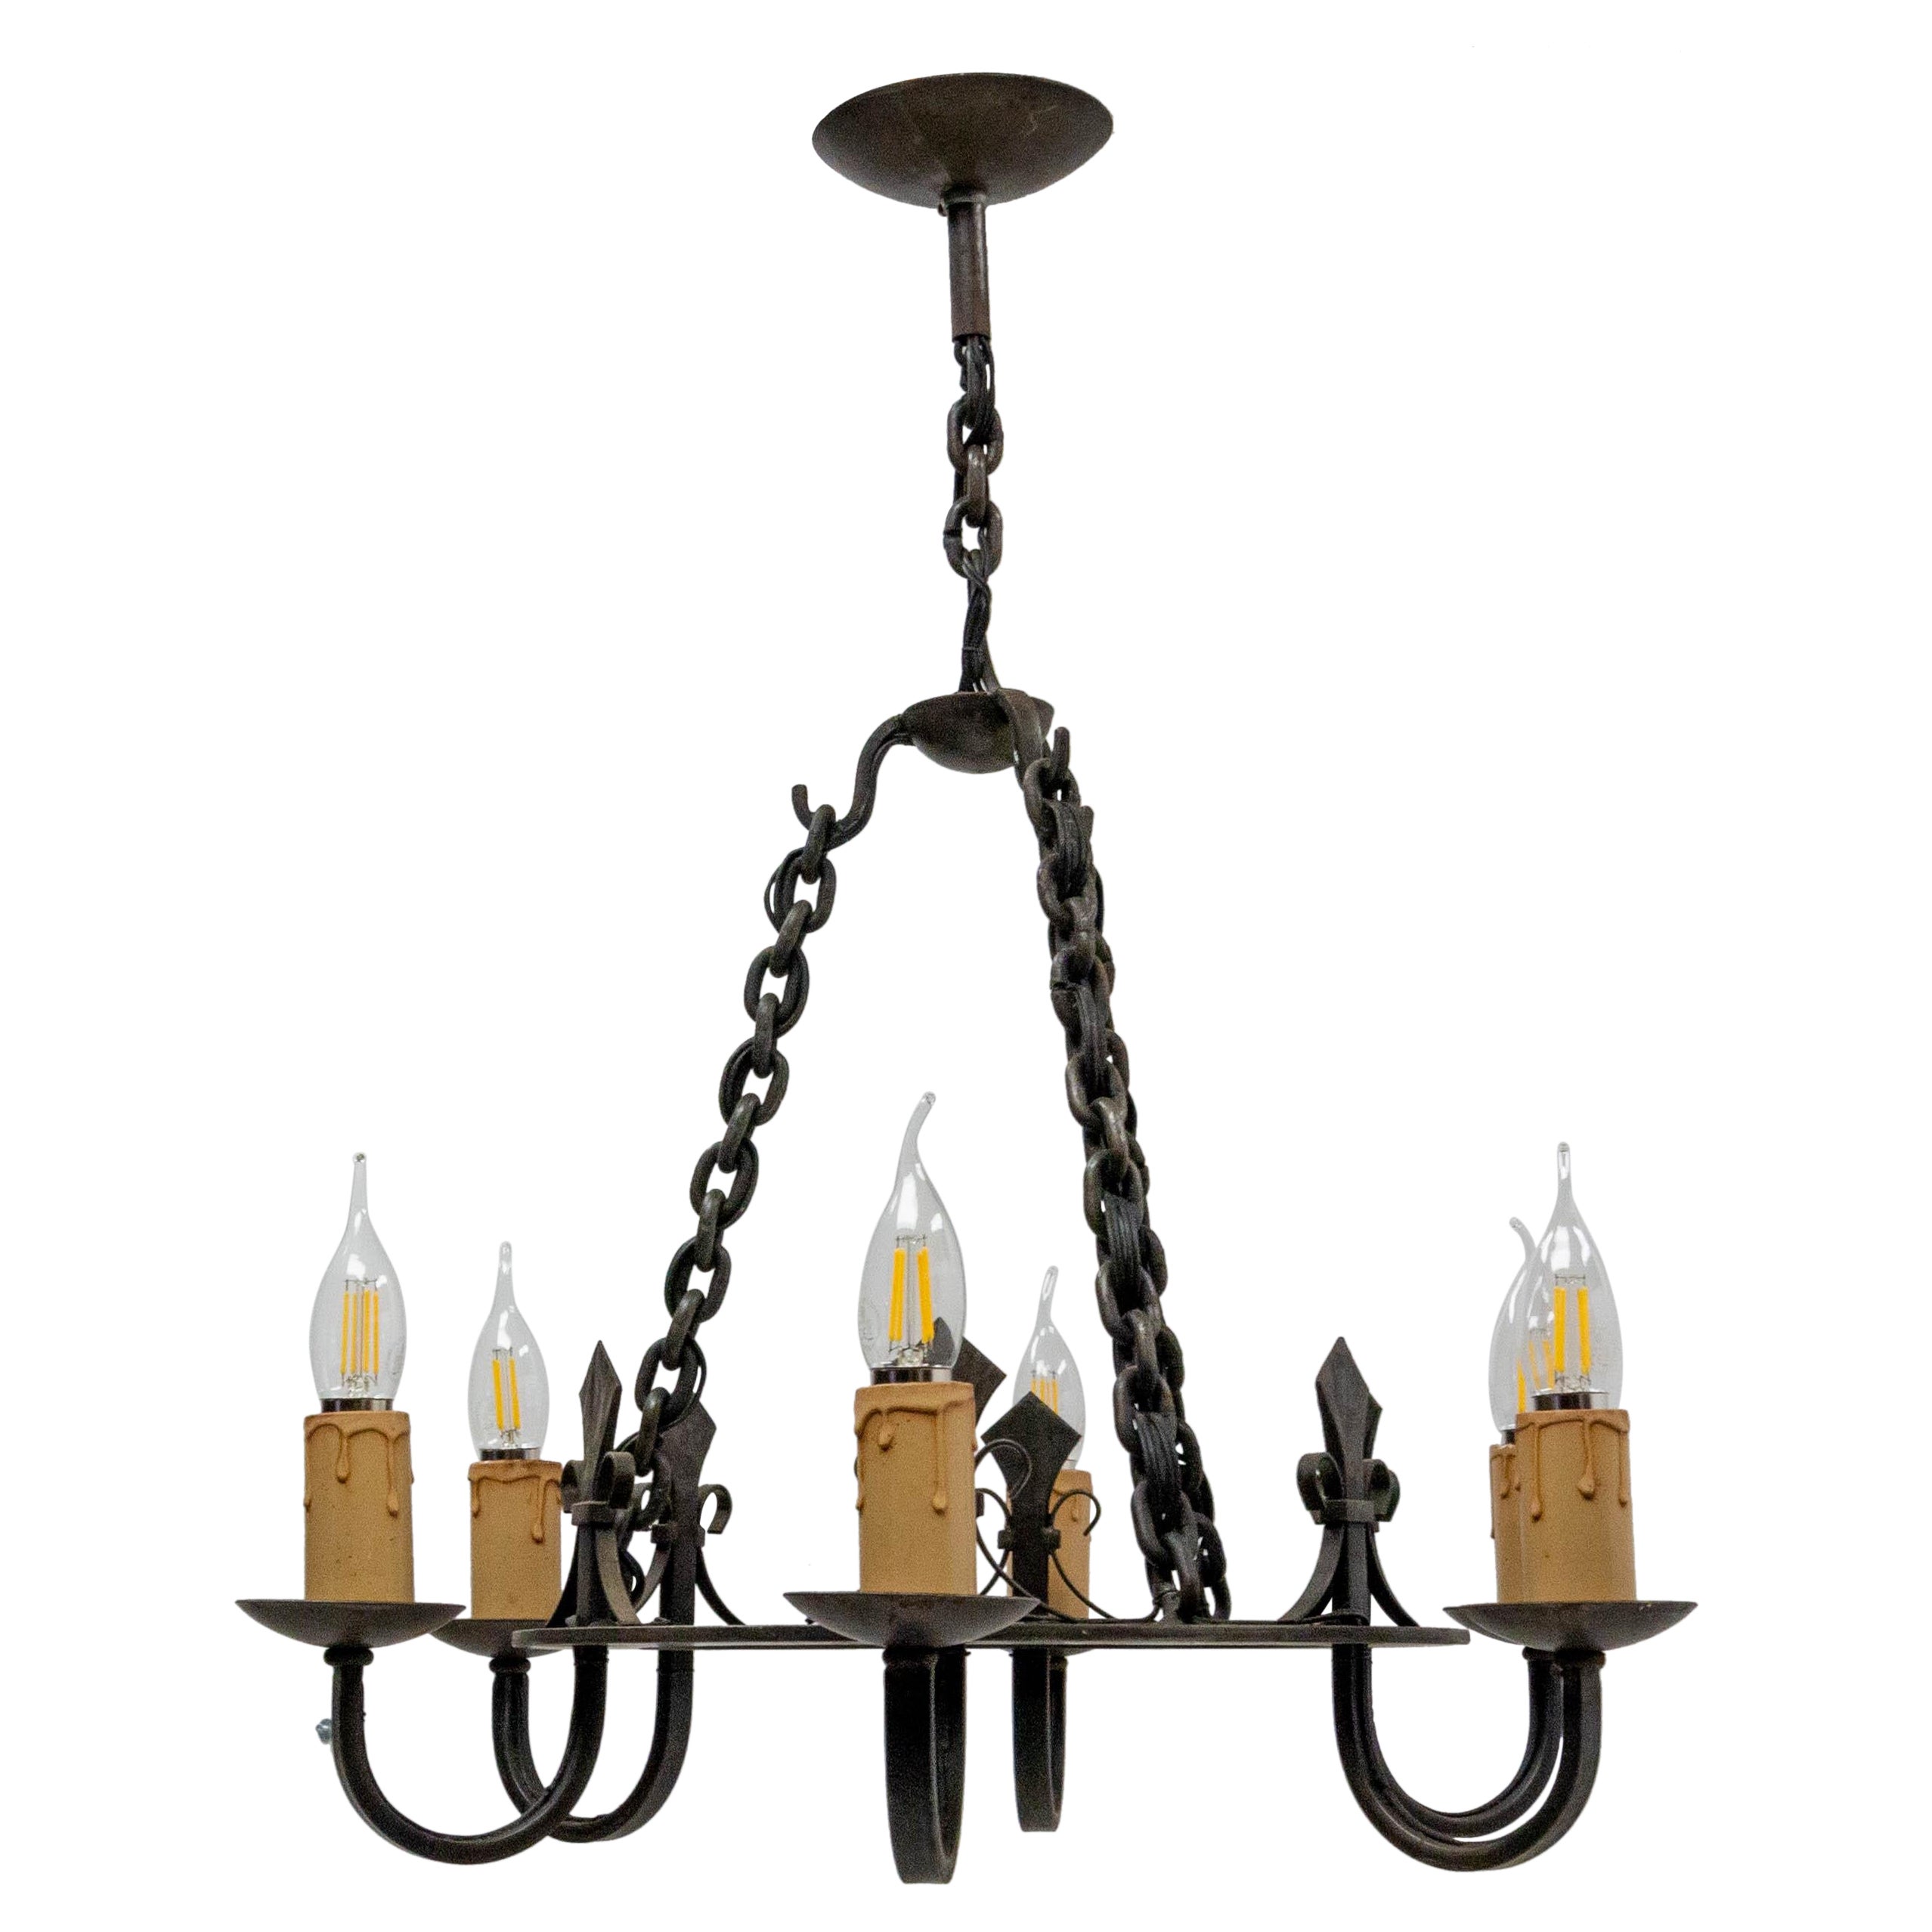 French Lustre Wrought Iron with Fleur-de-lys Chandelier, circa 1940 For Sale